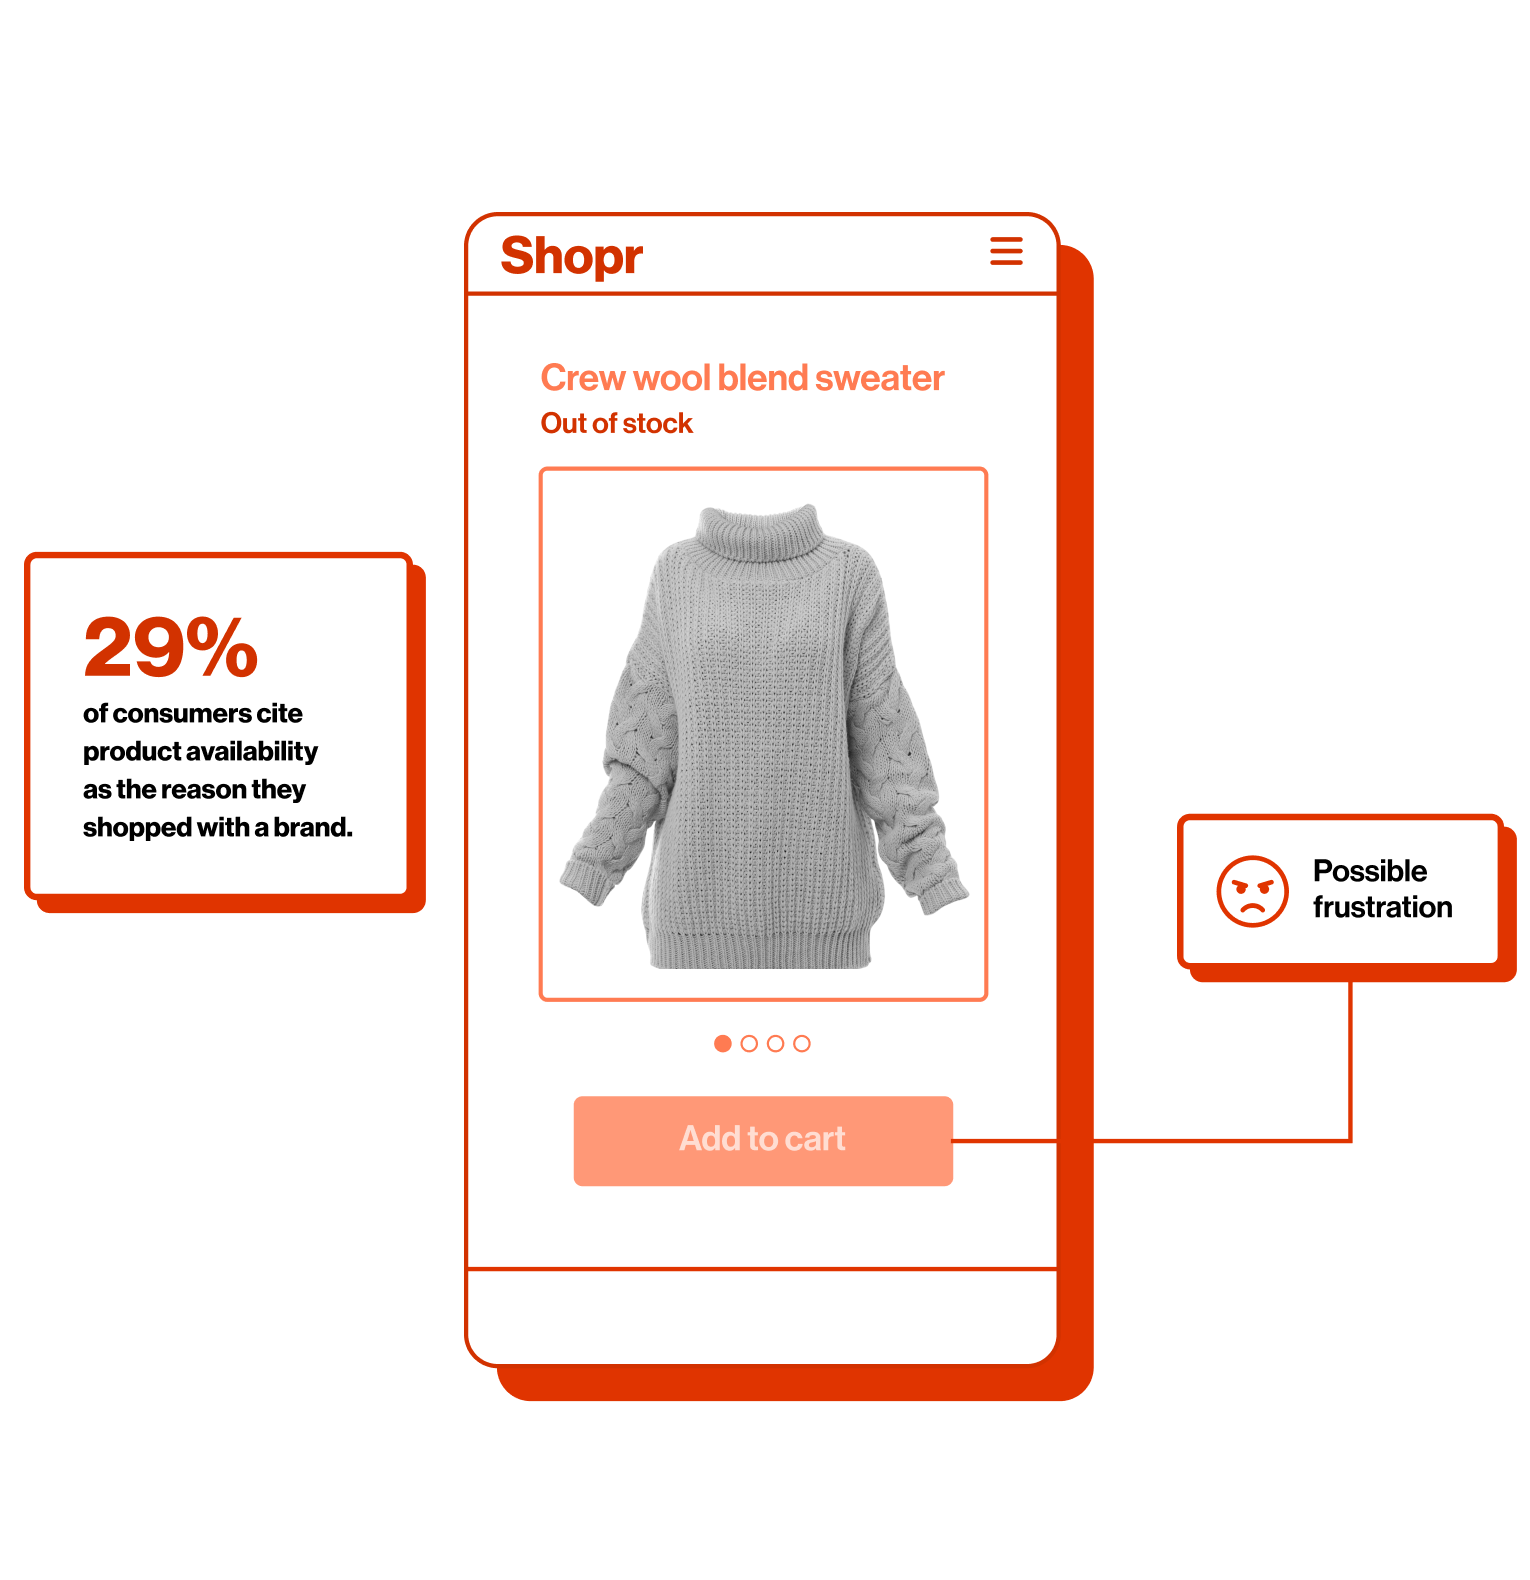 Example eCommerce interface with Quantum Metric insights.